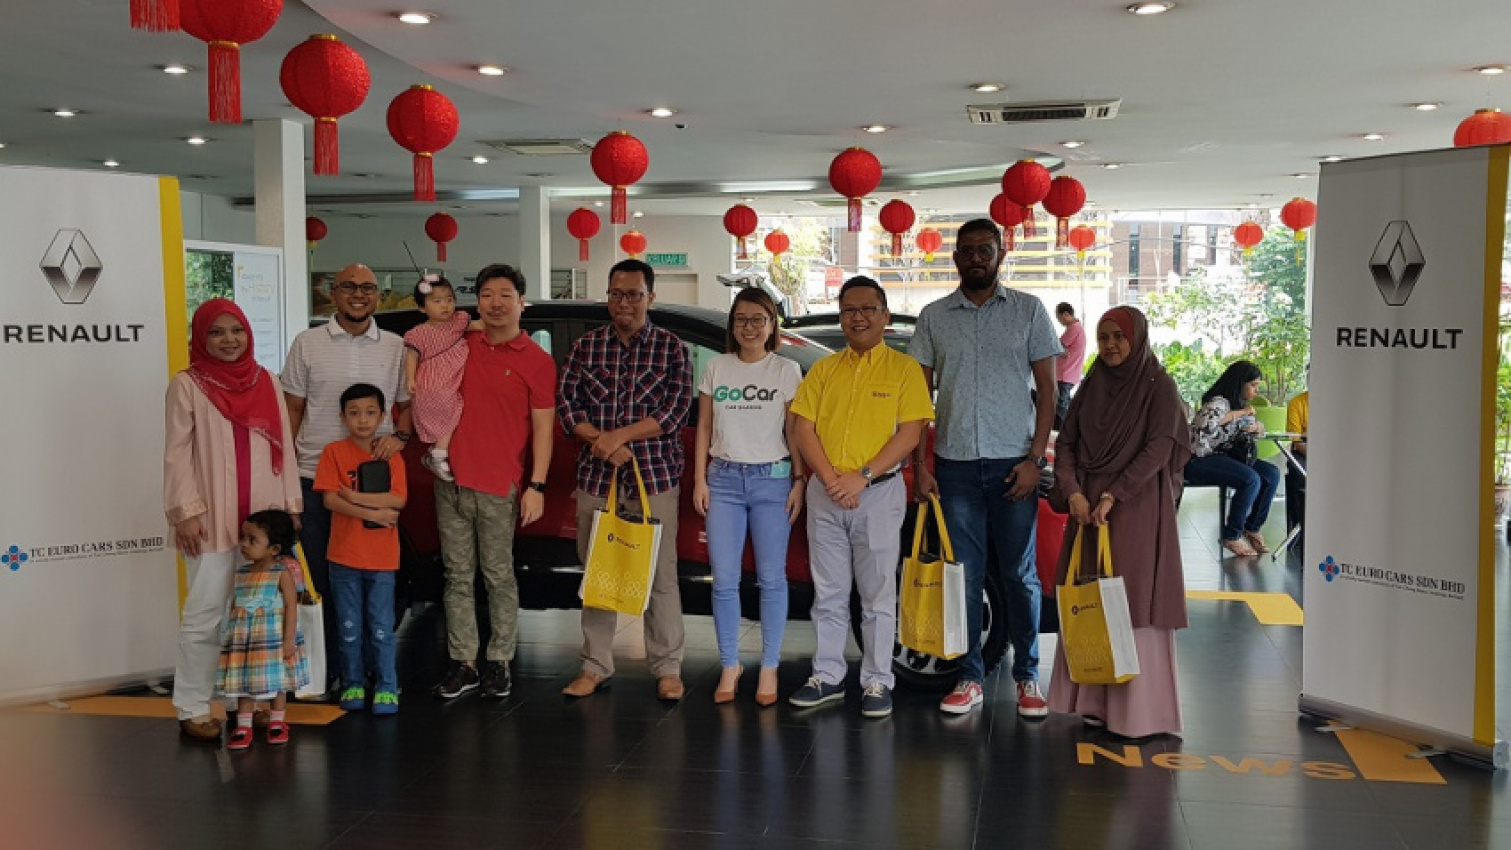 autos, car brands, cars, renault, automotive, crossover, malaysia, tc euro cars, renault test drive challenge winners receive prizes